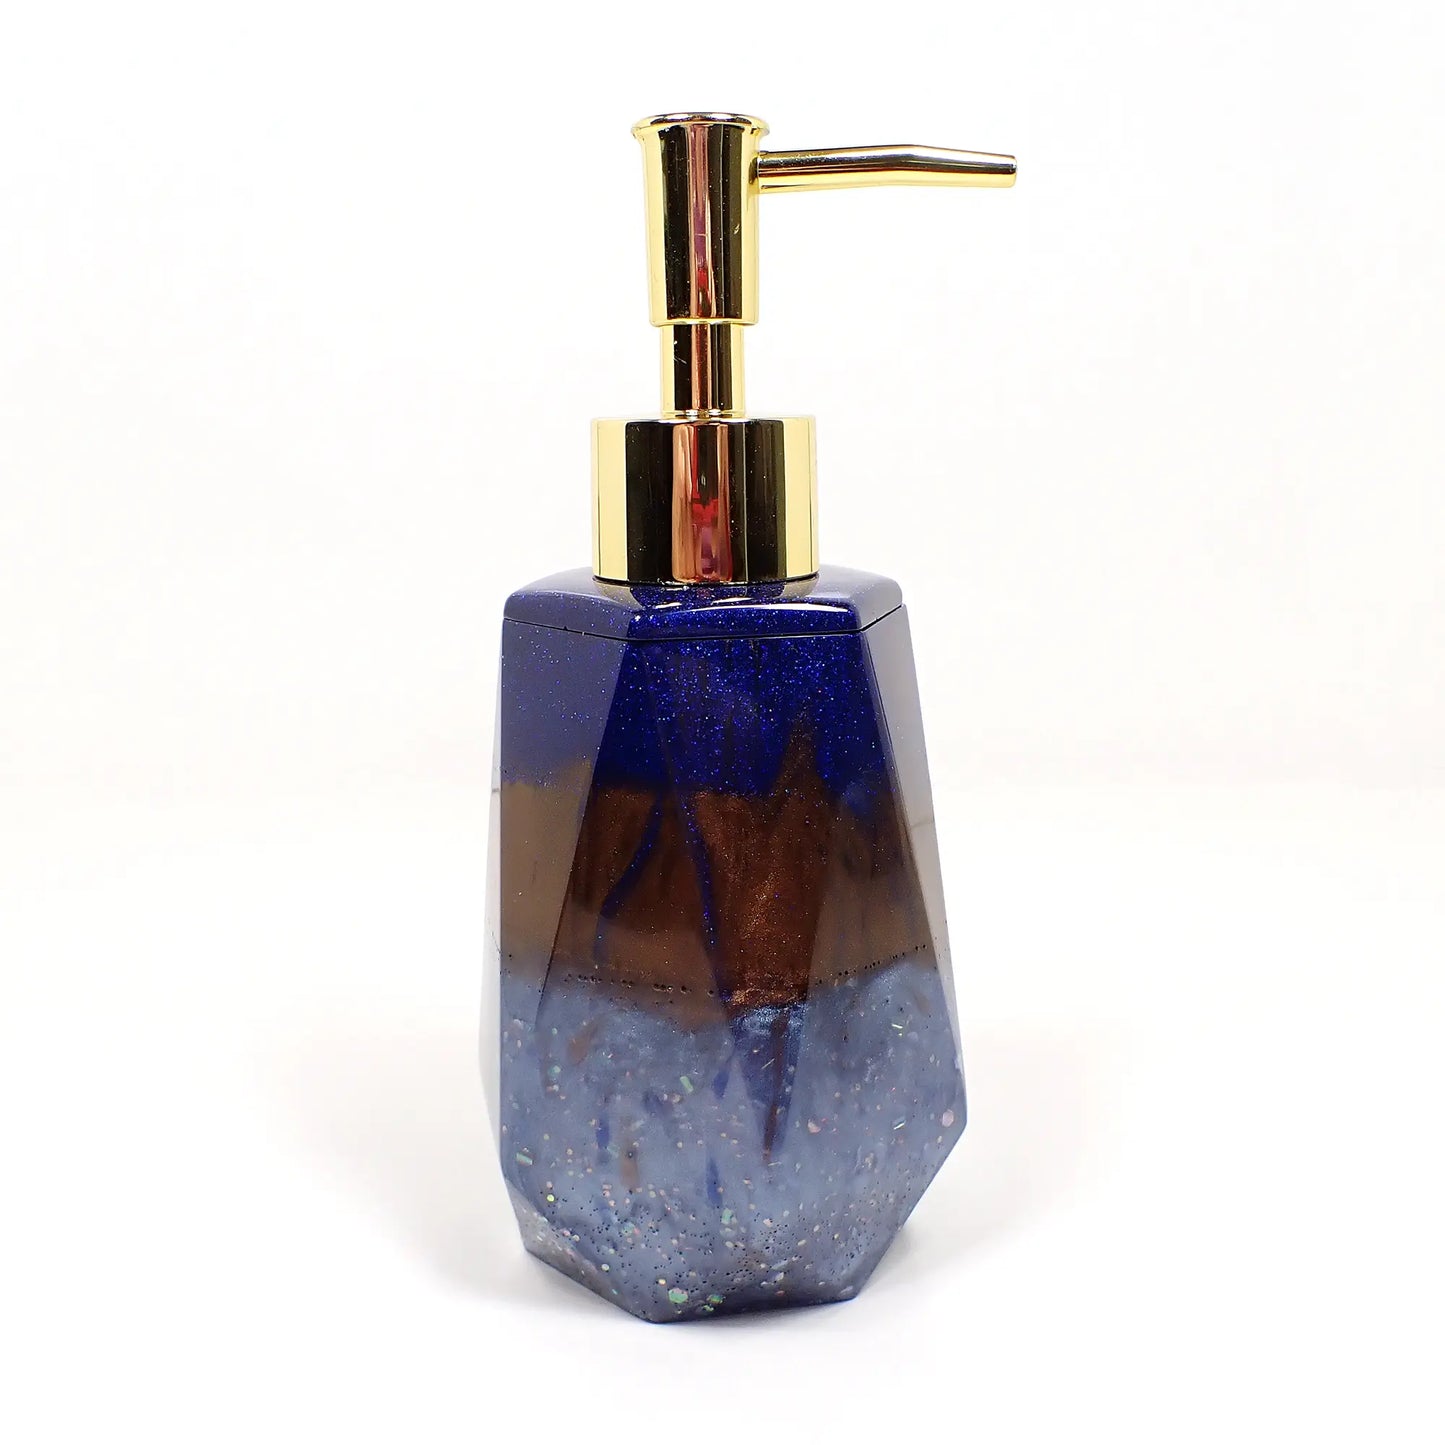 Faceted Handmade Pearly Blue and Brown Resin and Glitter Soap Dispenser, Lotion Dispenser